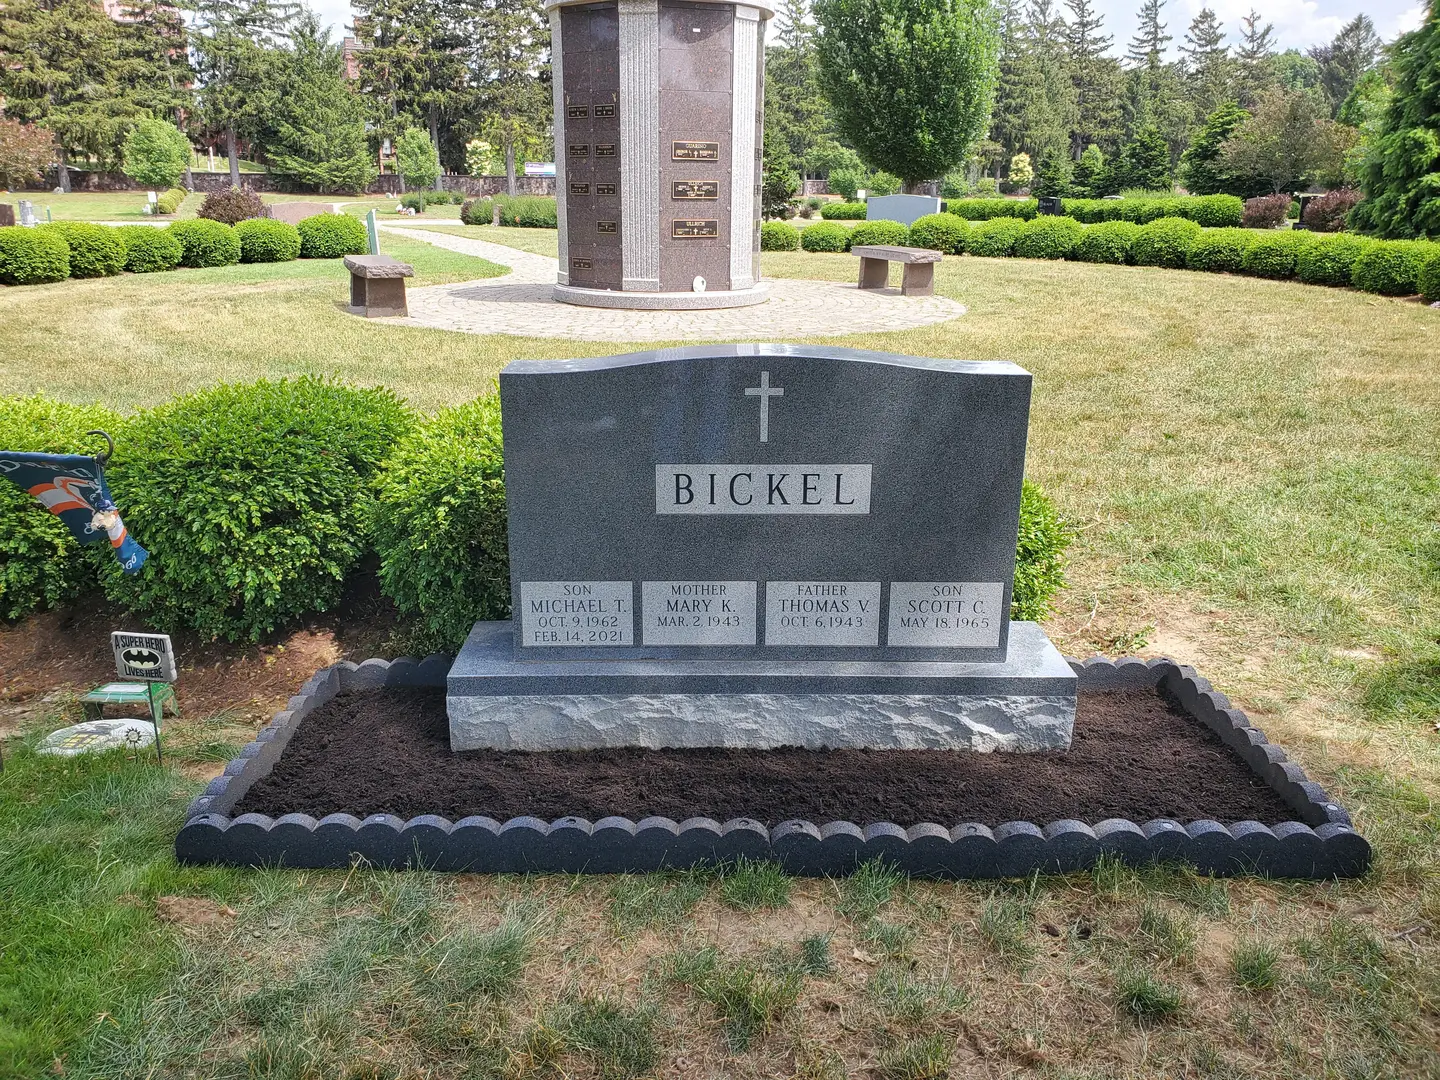 A grave in the middle of a field with bushes around it.